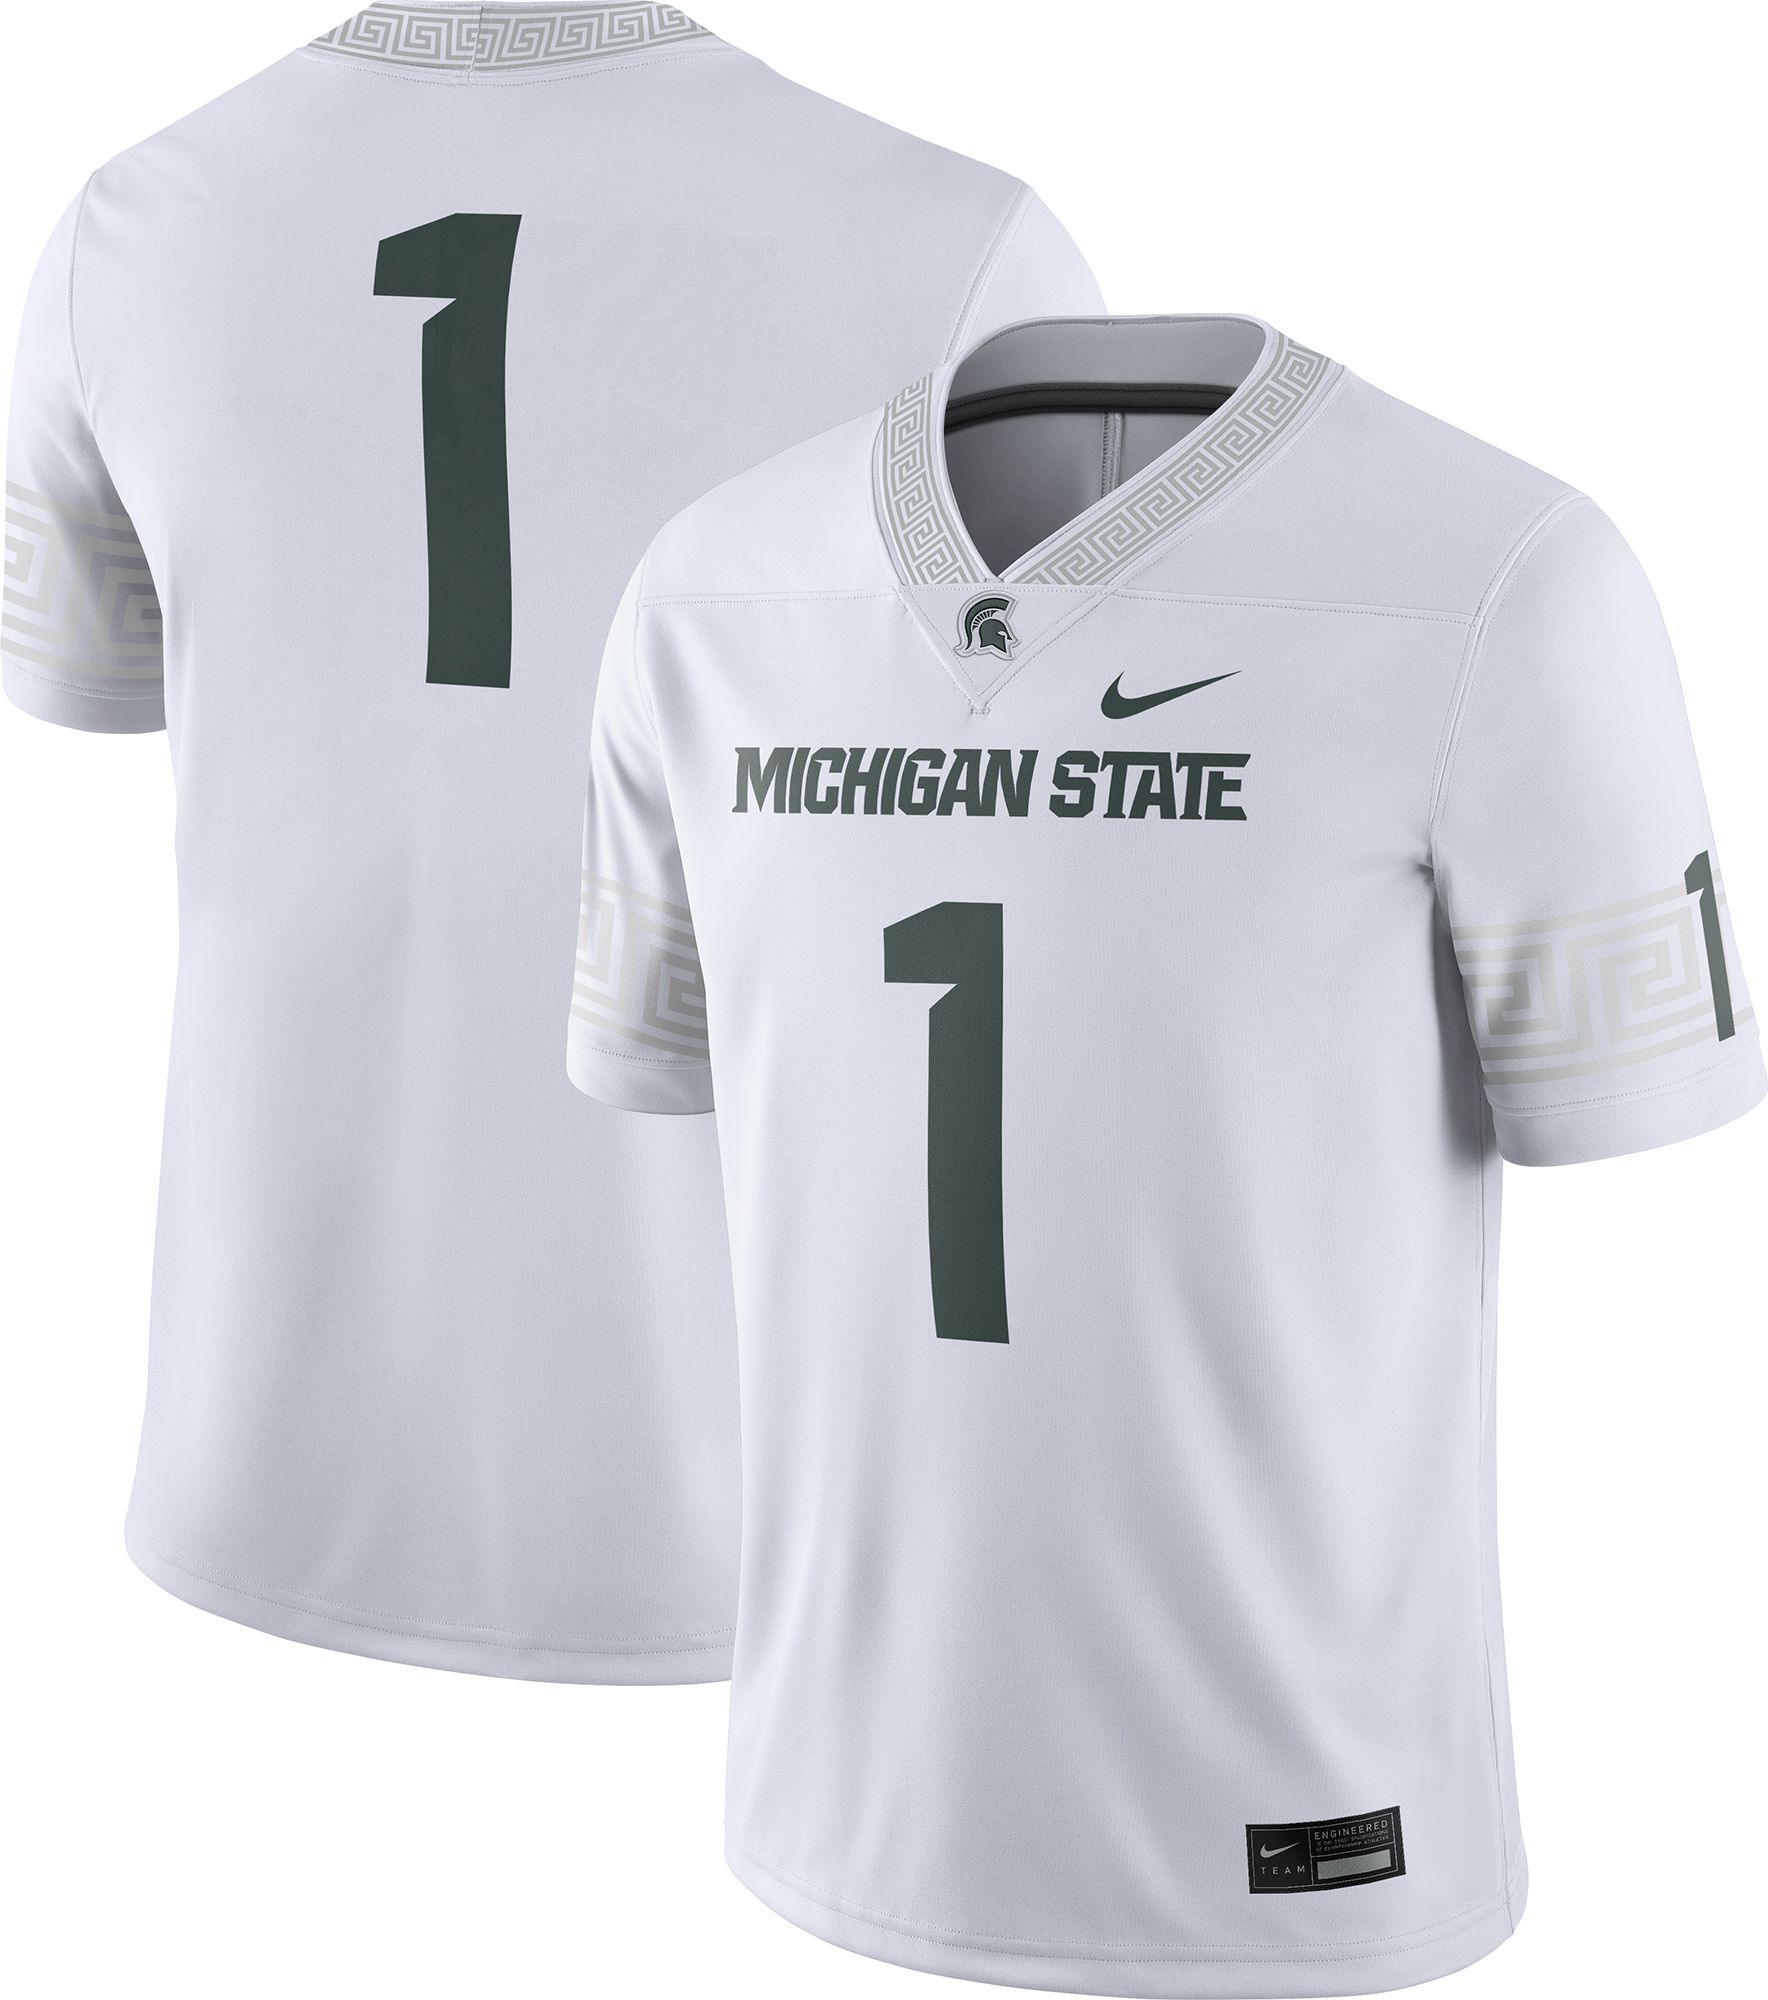 Spartans swimming jersey